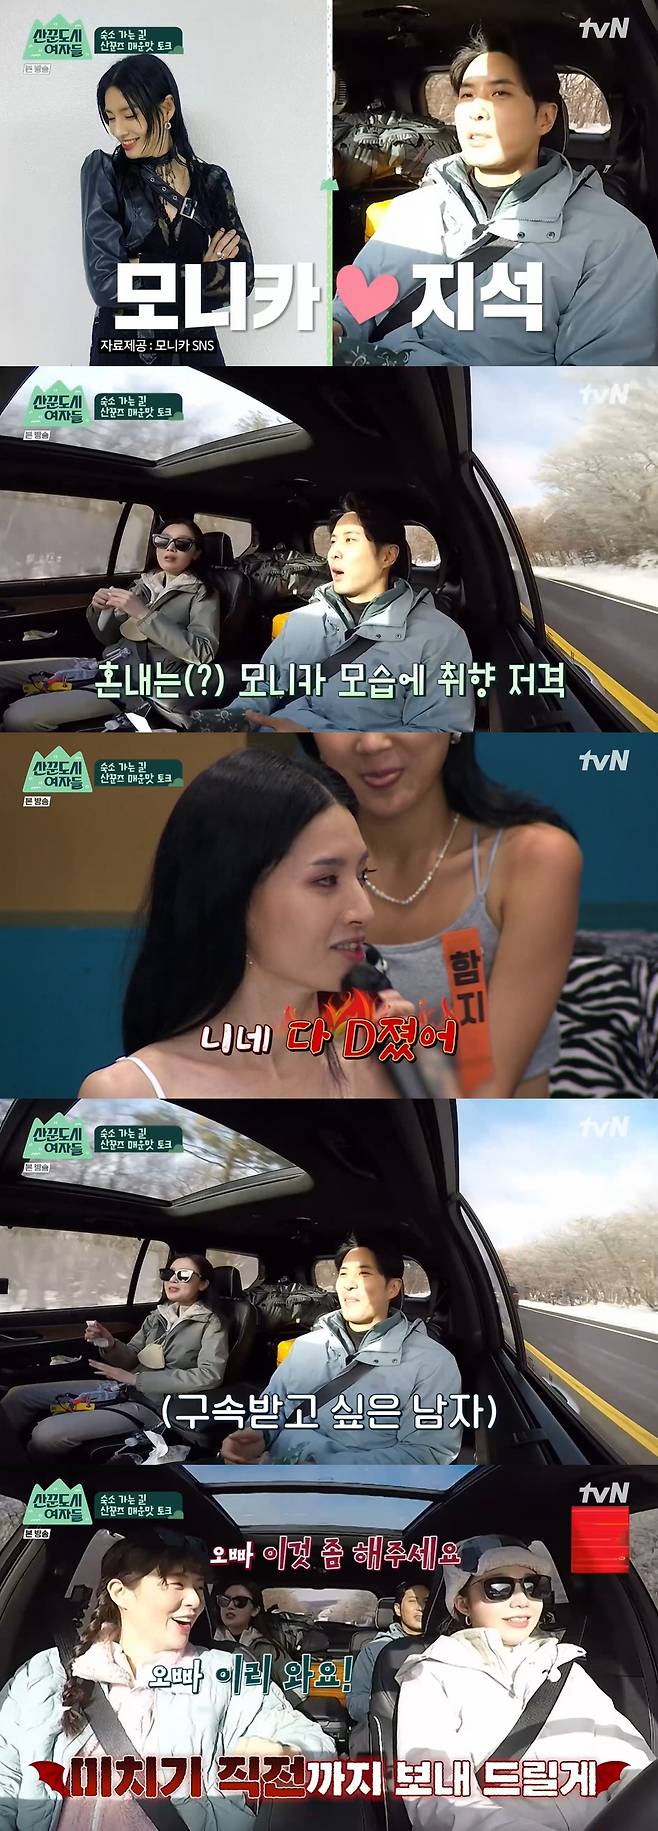 Actor Kim Ji-Seok has shown a fondness for choreographer Monica.On the 25th TVN entertainment program women in the city of industrialists, the meeting of Jeju Island of Jeong Eunji, Lee Sun-bin, Han Sun-hwa and Kim Ji-seok was broadcast.Jung Eunji, Lee Sun-bin and Han Sun-hwa had breakfast and talked about debut candles; Jung Eunji said: I tried to run away as soon as I debut.I was born and never lived away from my mother (to prepare for debut) but I came up alone in Busan to Seoul. I was in bed and I thought arrogantly.It was because of uncertainty about the future, he said, crying to leader Park Cho-rong, saying, I will not.The surprised managers said the situation was over.He also asked the members to consider what it is that the company has been banned at the beginning of debut.The answer is Yanpink Lipstick, and Jung Eunji said, The Yanpink is not so good that the makeup teacher applied it in different colors.Han Sun-hwa said: I lived in Cheongdam-dong in the beginning of debut; my mom came to the restaurant (at the lodgings) so I went into the restaurant to buy you a pork belly, and my mom was surprised to see the price tag.I went to another cheap restaurant because it was too expensive. Then, he headed to Jeju Mark Ormrod eo-seung-ak called Mini Halla Mountain, but Kim Ji-seok appeared in surprise and surprised everyone.Kim Ji-Seok has appeared as a members blind date in The Women of the City of Drinkers. After wearing Eisen together, he started climbing.The four chatty people soon became less powerful and less spoken, especially Kim Ji-seok, who was the most tired, said, I am afraid that I have to go down as much as I have gone up.As we neared the top, we were amazed at the beautiful snowy scenery, and we were all happy with the tea time together.On the way to the hostel, Kim Ji-Seok was asked, What reason do you feel attractive to? I saw Swoopa and Monica was good.I want to be pointed out (to Monica) because I look good in the way Im angry. Han Sun-hwa said, Today, the three of us will arrest you. Jung Eunji said, I will send you to the point of crazy.The hostel that arrived soon was filled with a lot of exclamation because there were many private open-air baths and spacious rooms in the bathtub.